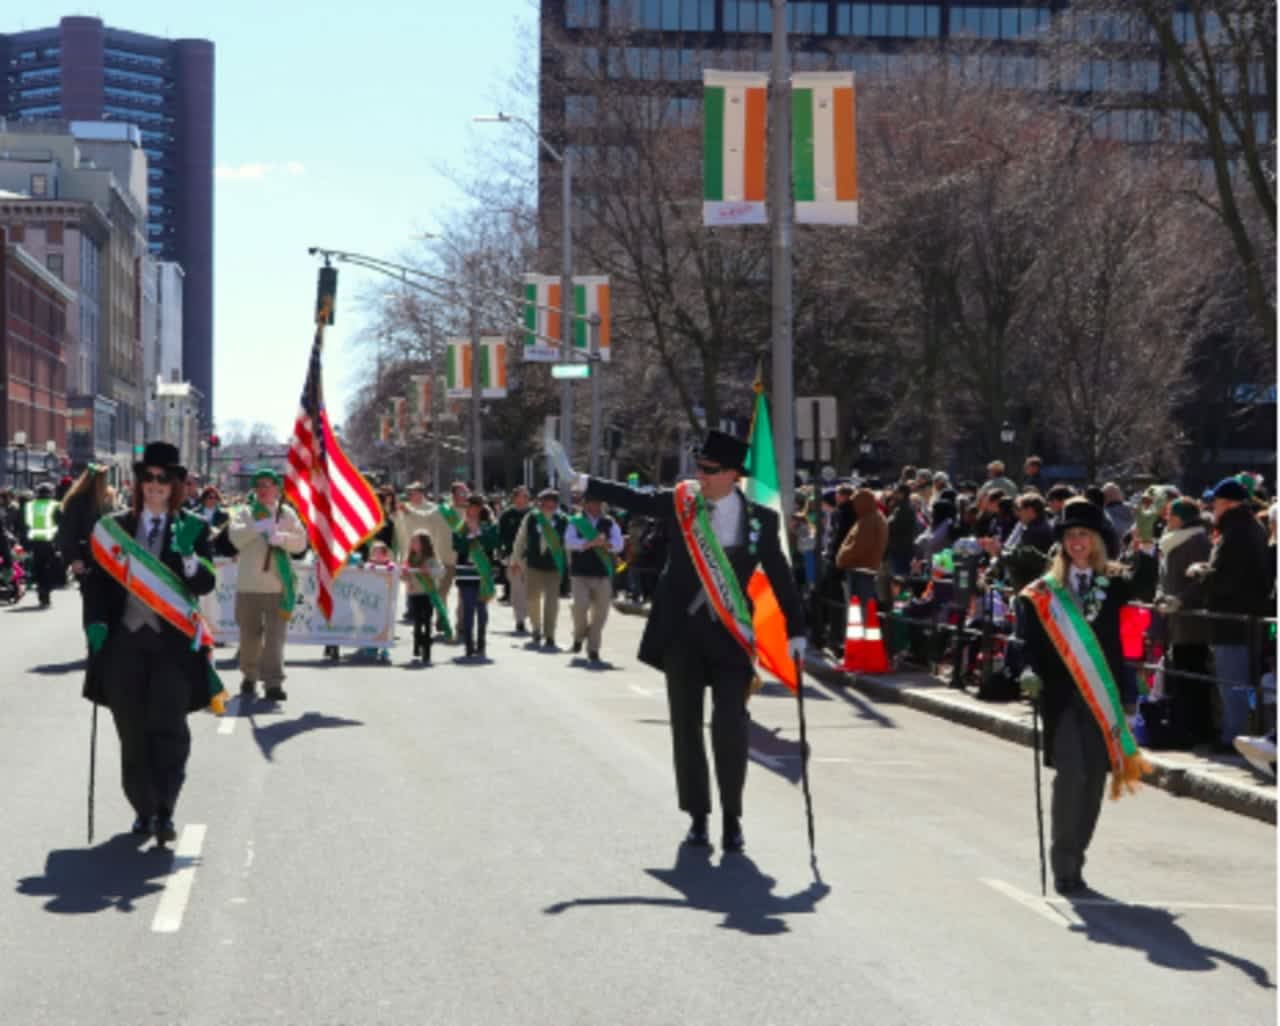 A previous St. Patrick's Day parade in New Haven.